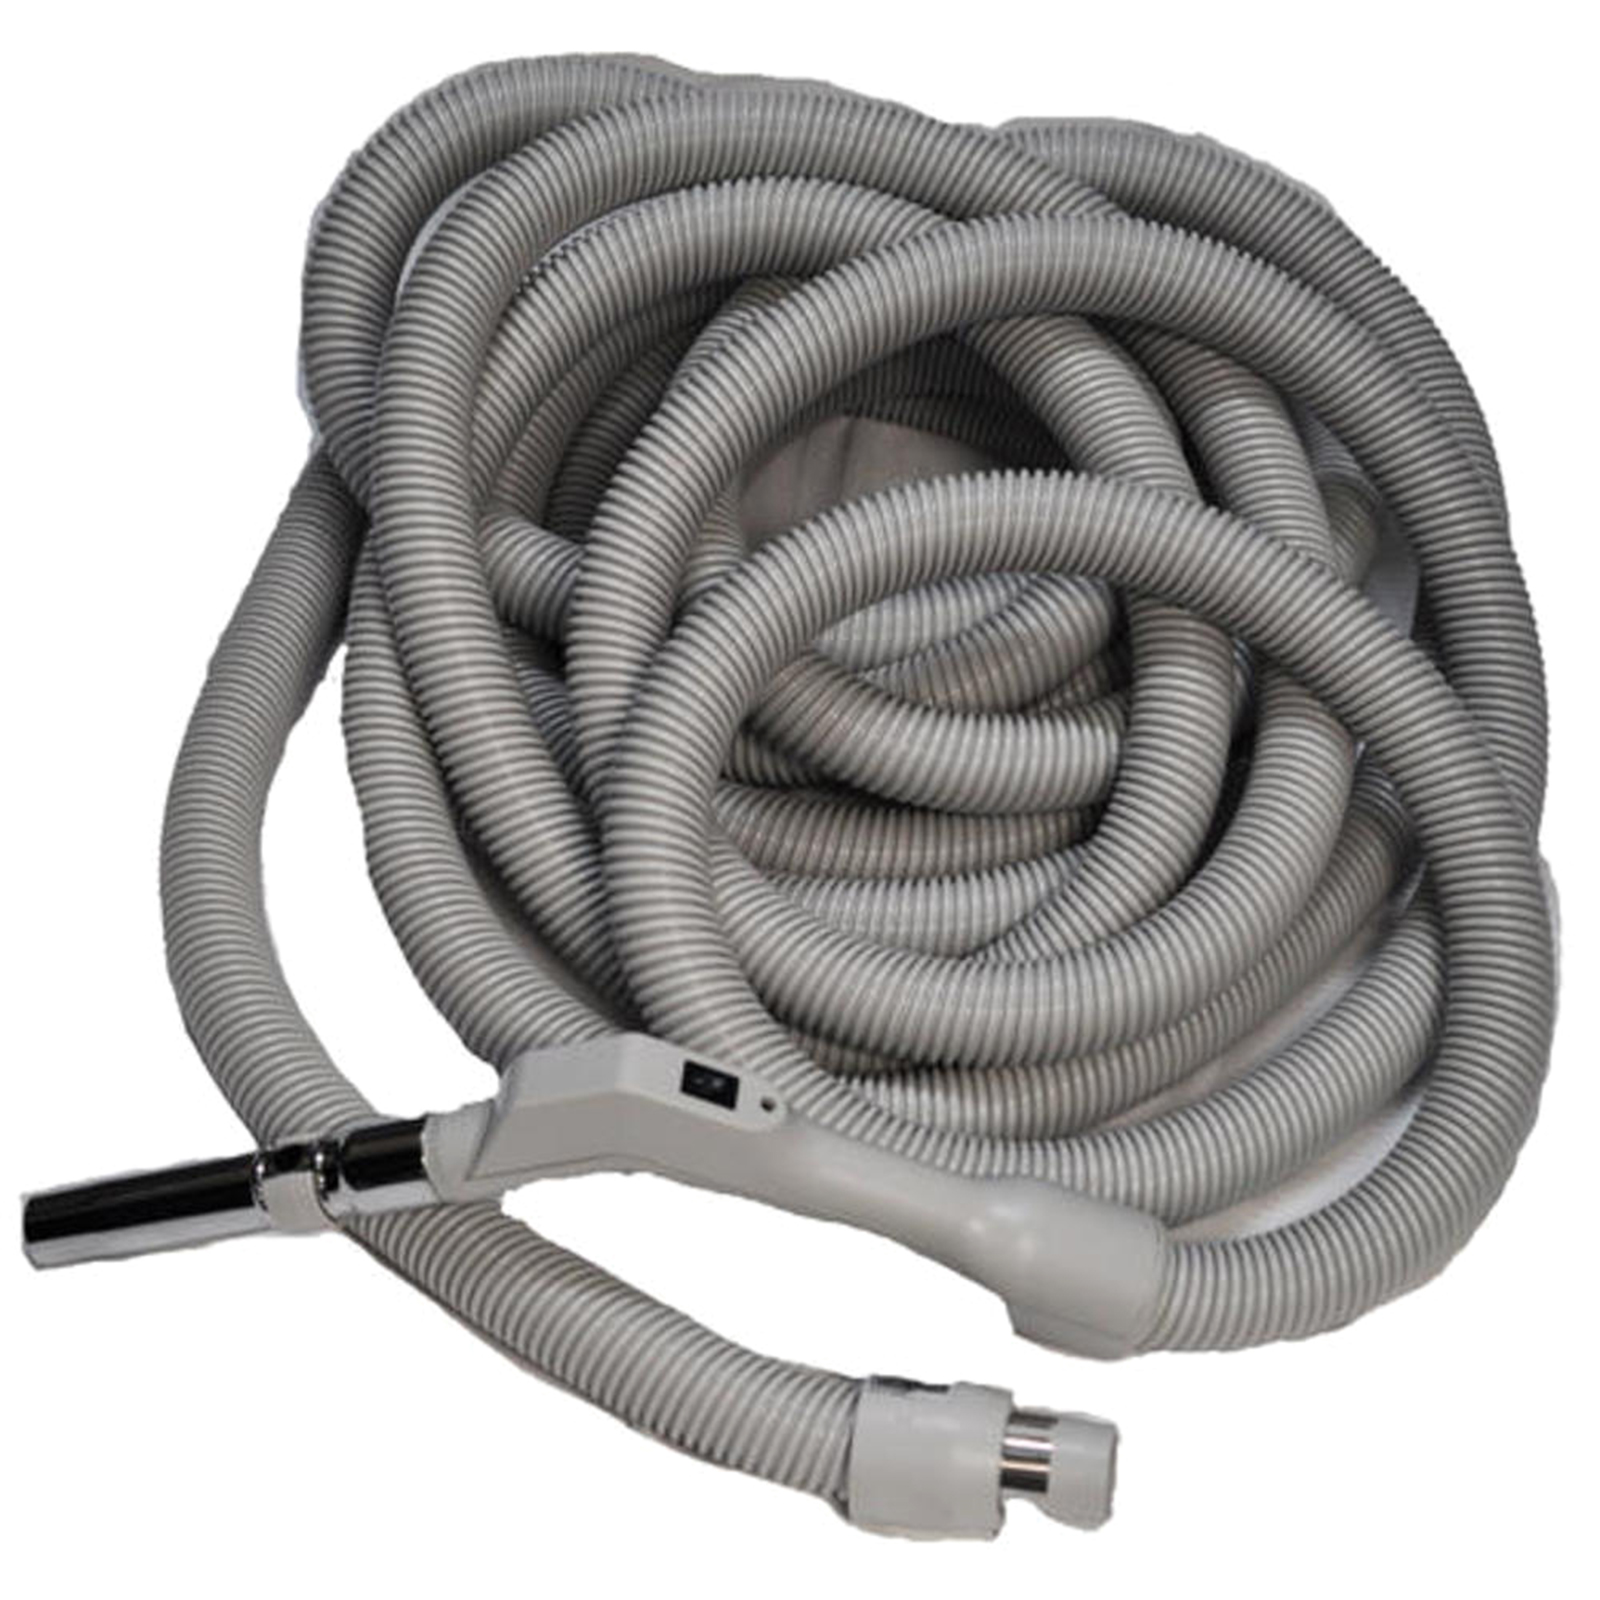 Central Vac BI-4365 40' Hose Assy Low Voltage Crushproof Hose with Switch - Grey